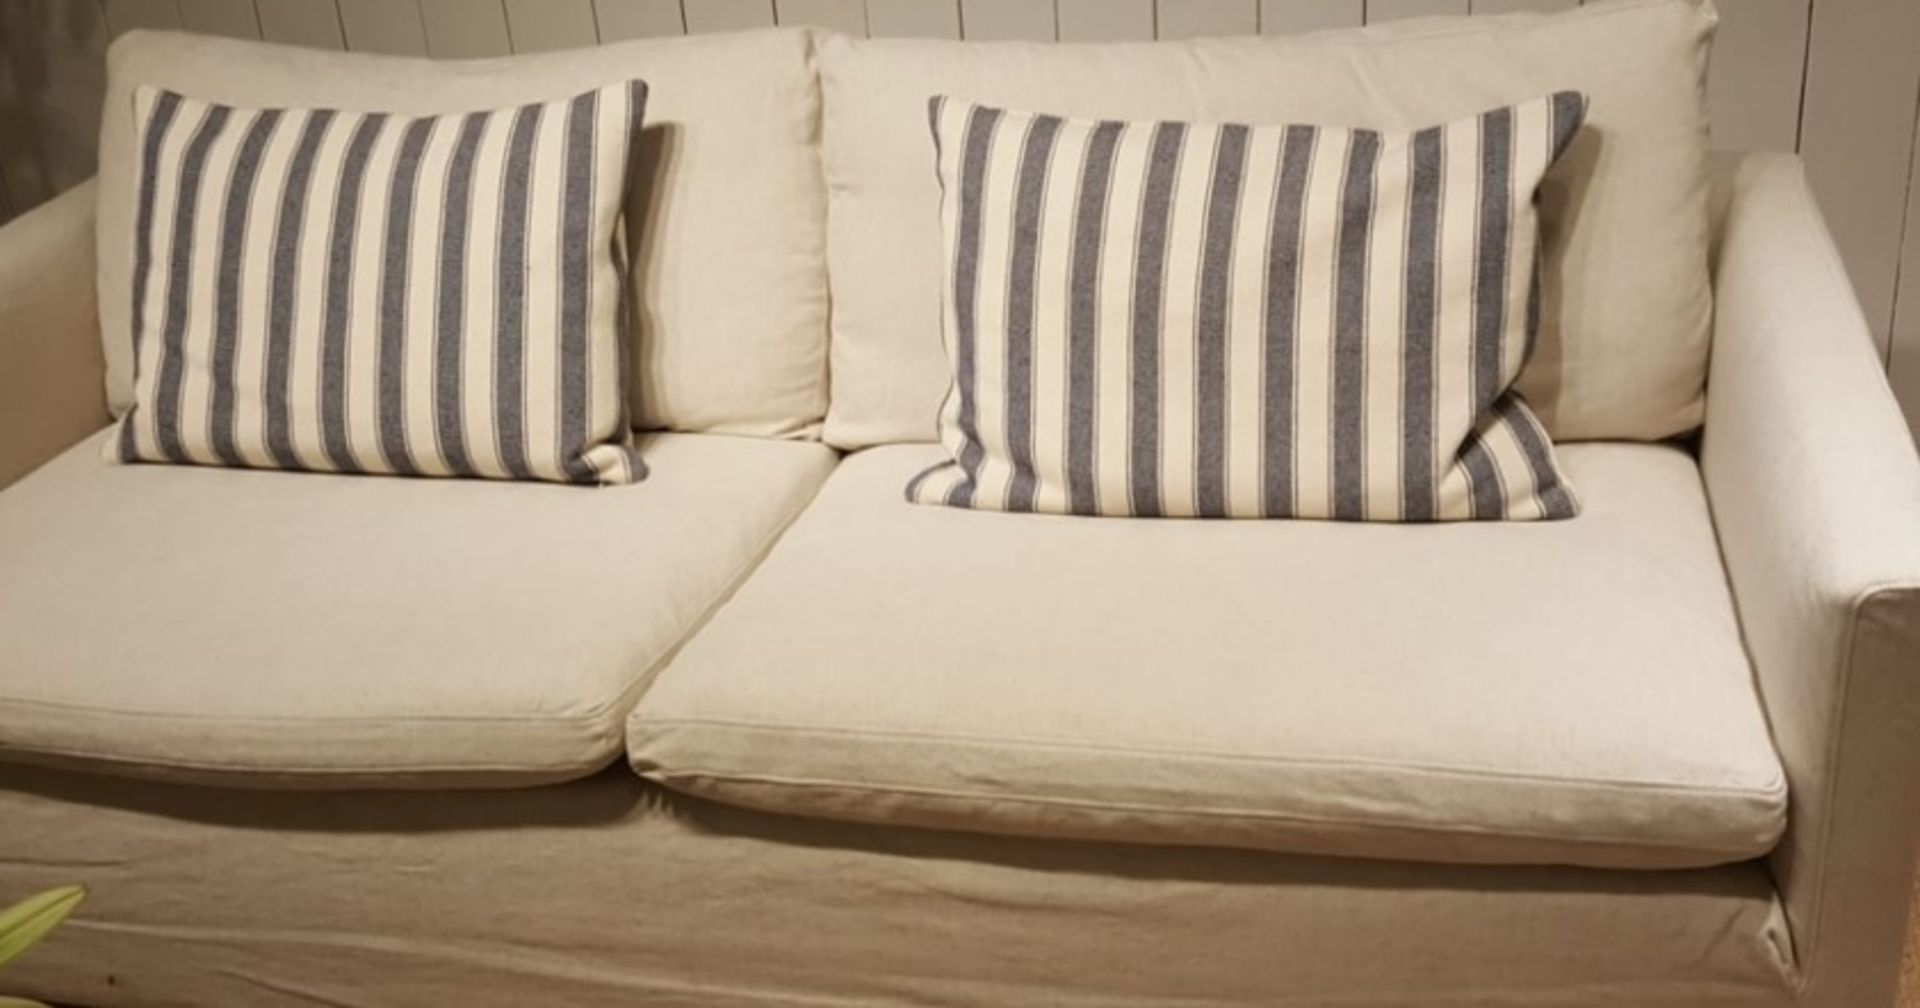 Baja Cushion Regal Stripe The Baja Cushions In Thick Yet Soft Linens. Each Finish Is Bright And - Image 2 of 2